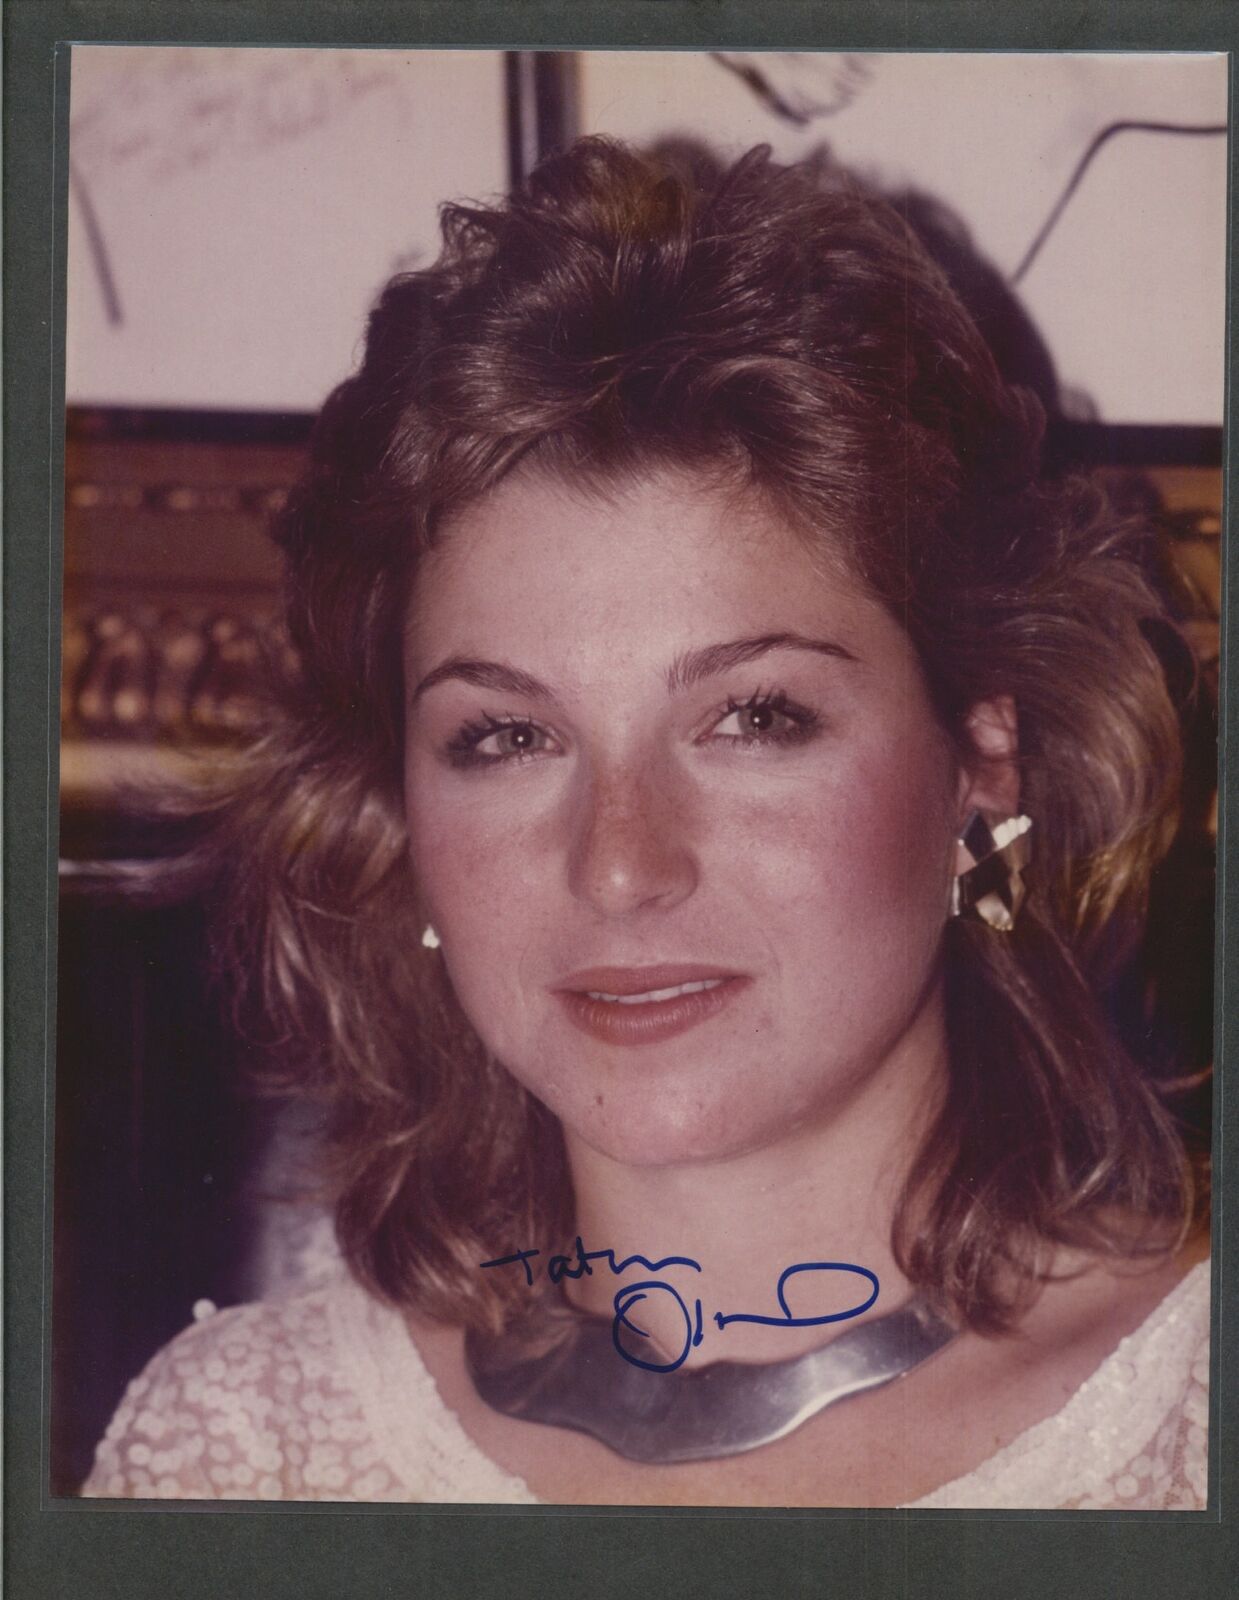 Tatum O'neal - Signed Autograph Color 8x10 Photo Poster painting - Little Darlings - Paper Moon